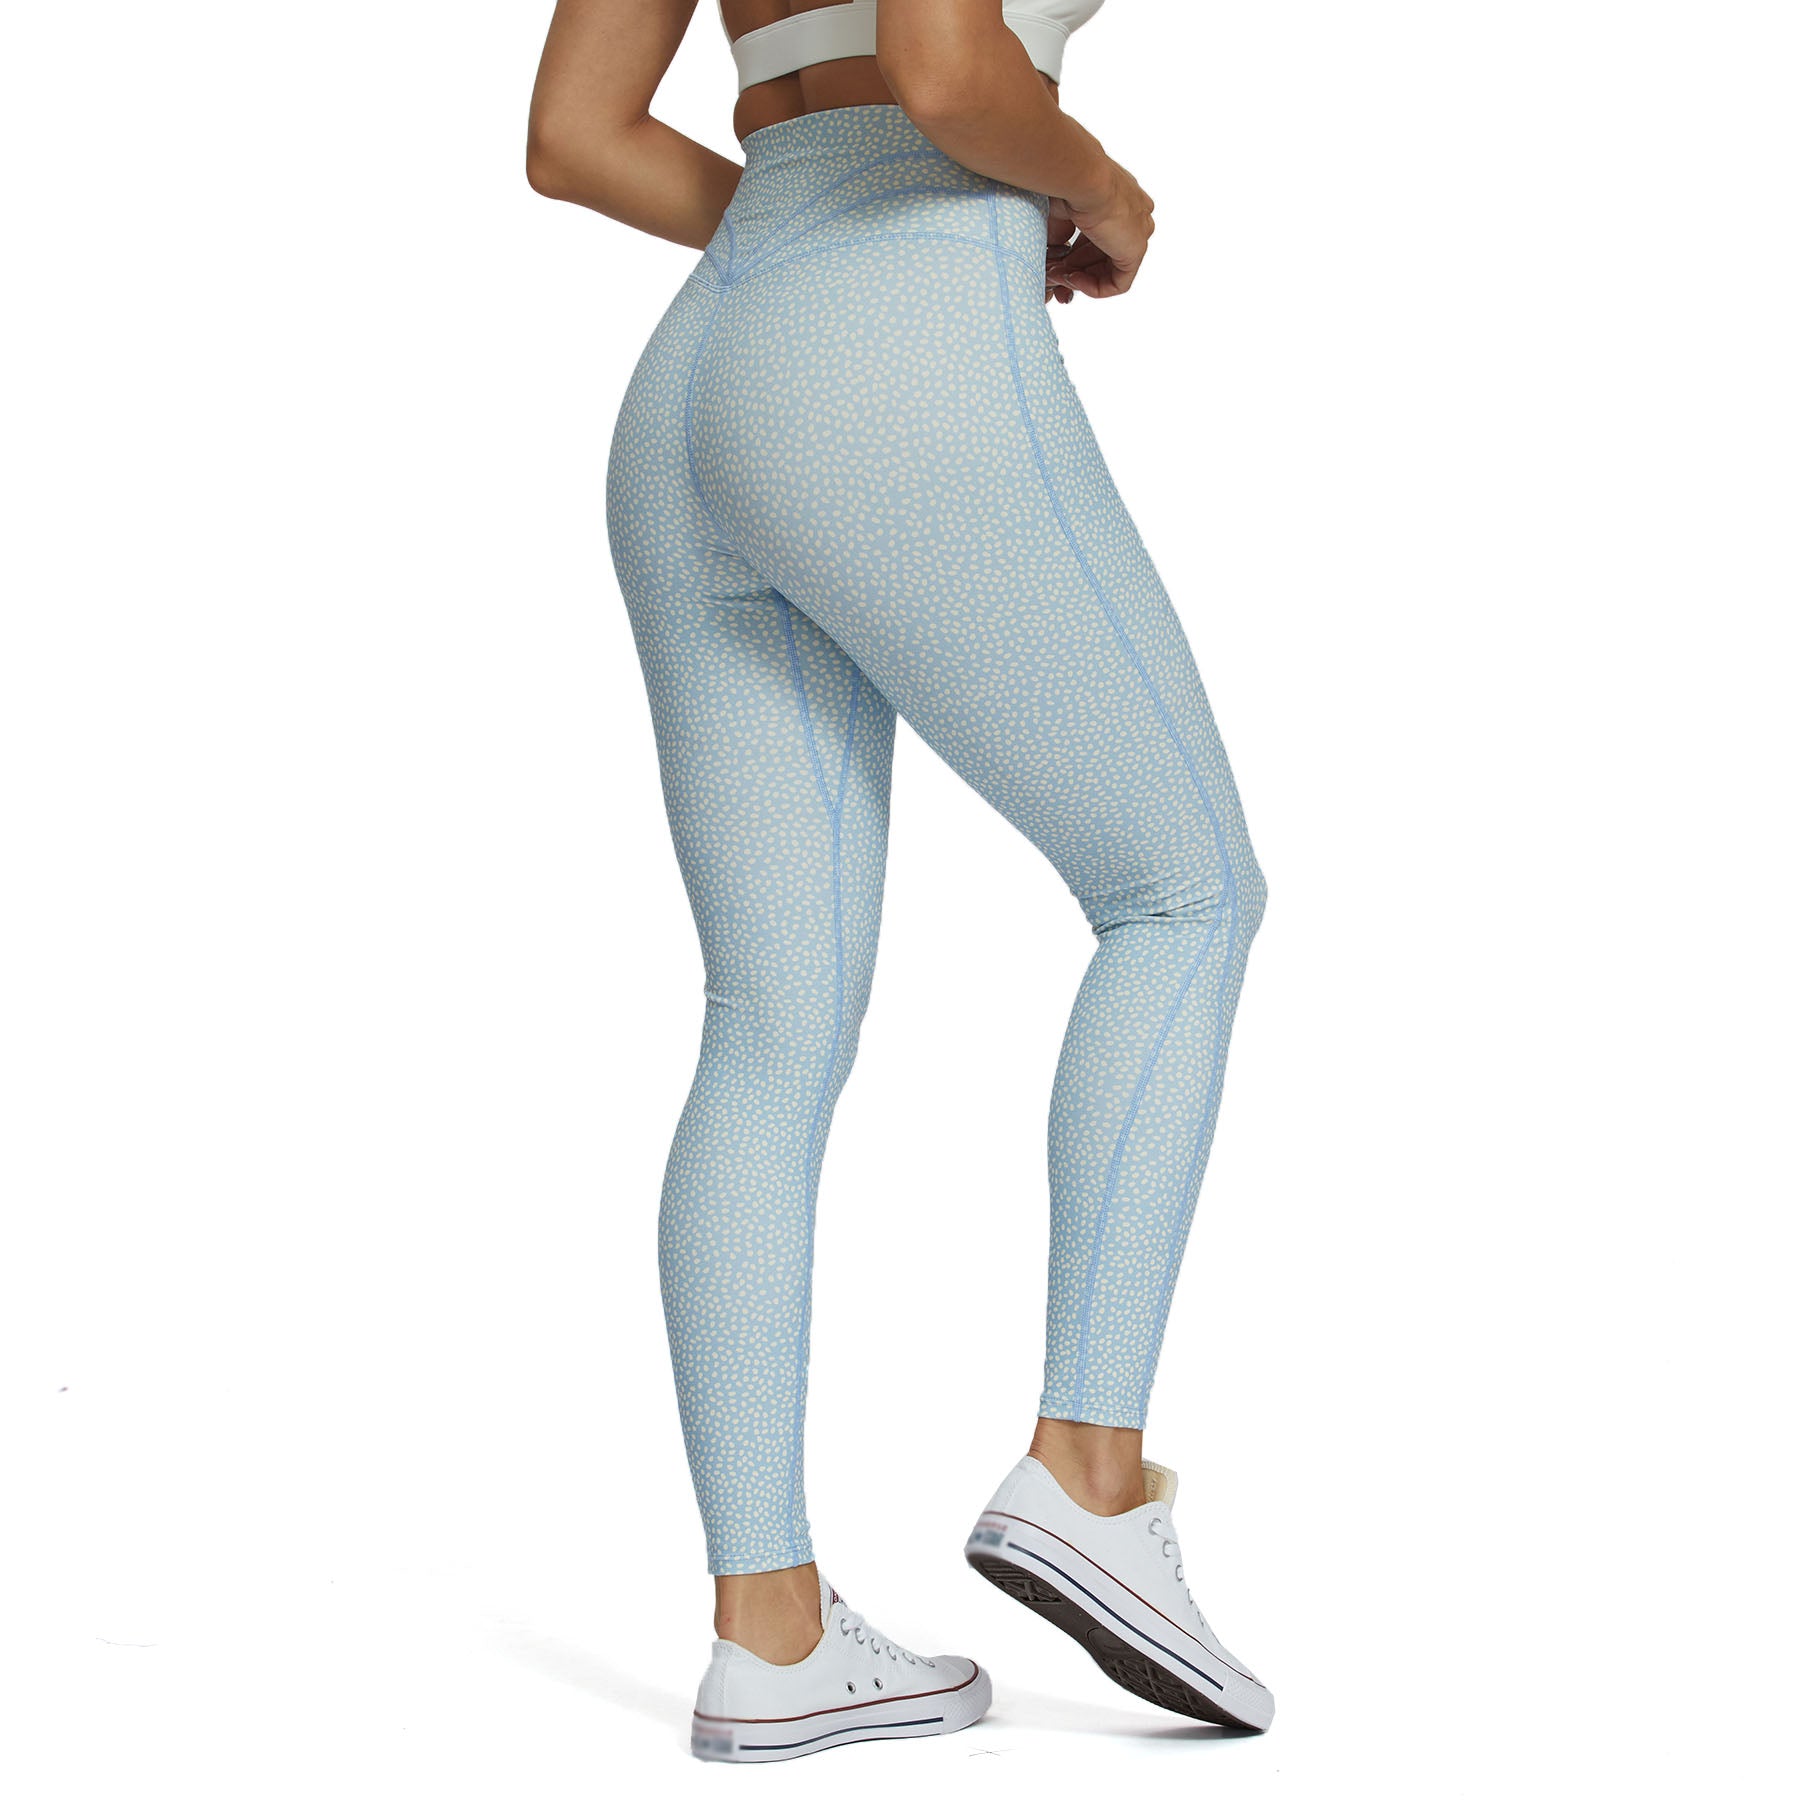 Aoxjox Trinity Leggings Could Give You an Instant Hourglass Figure